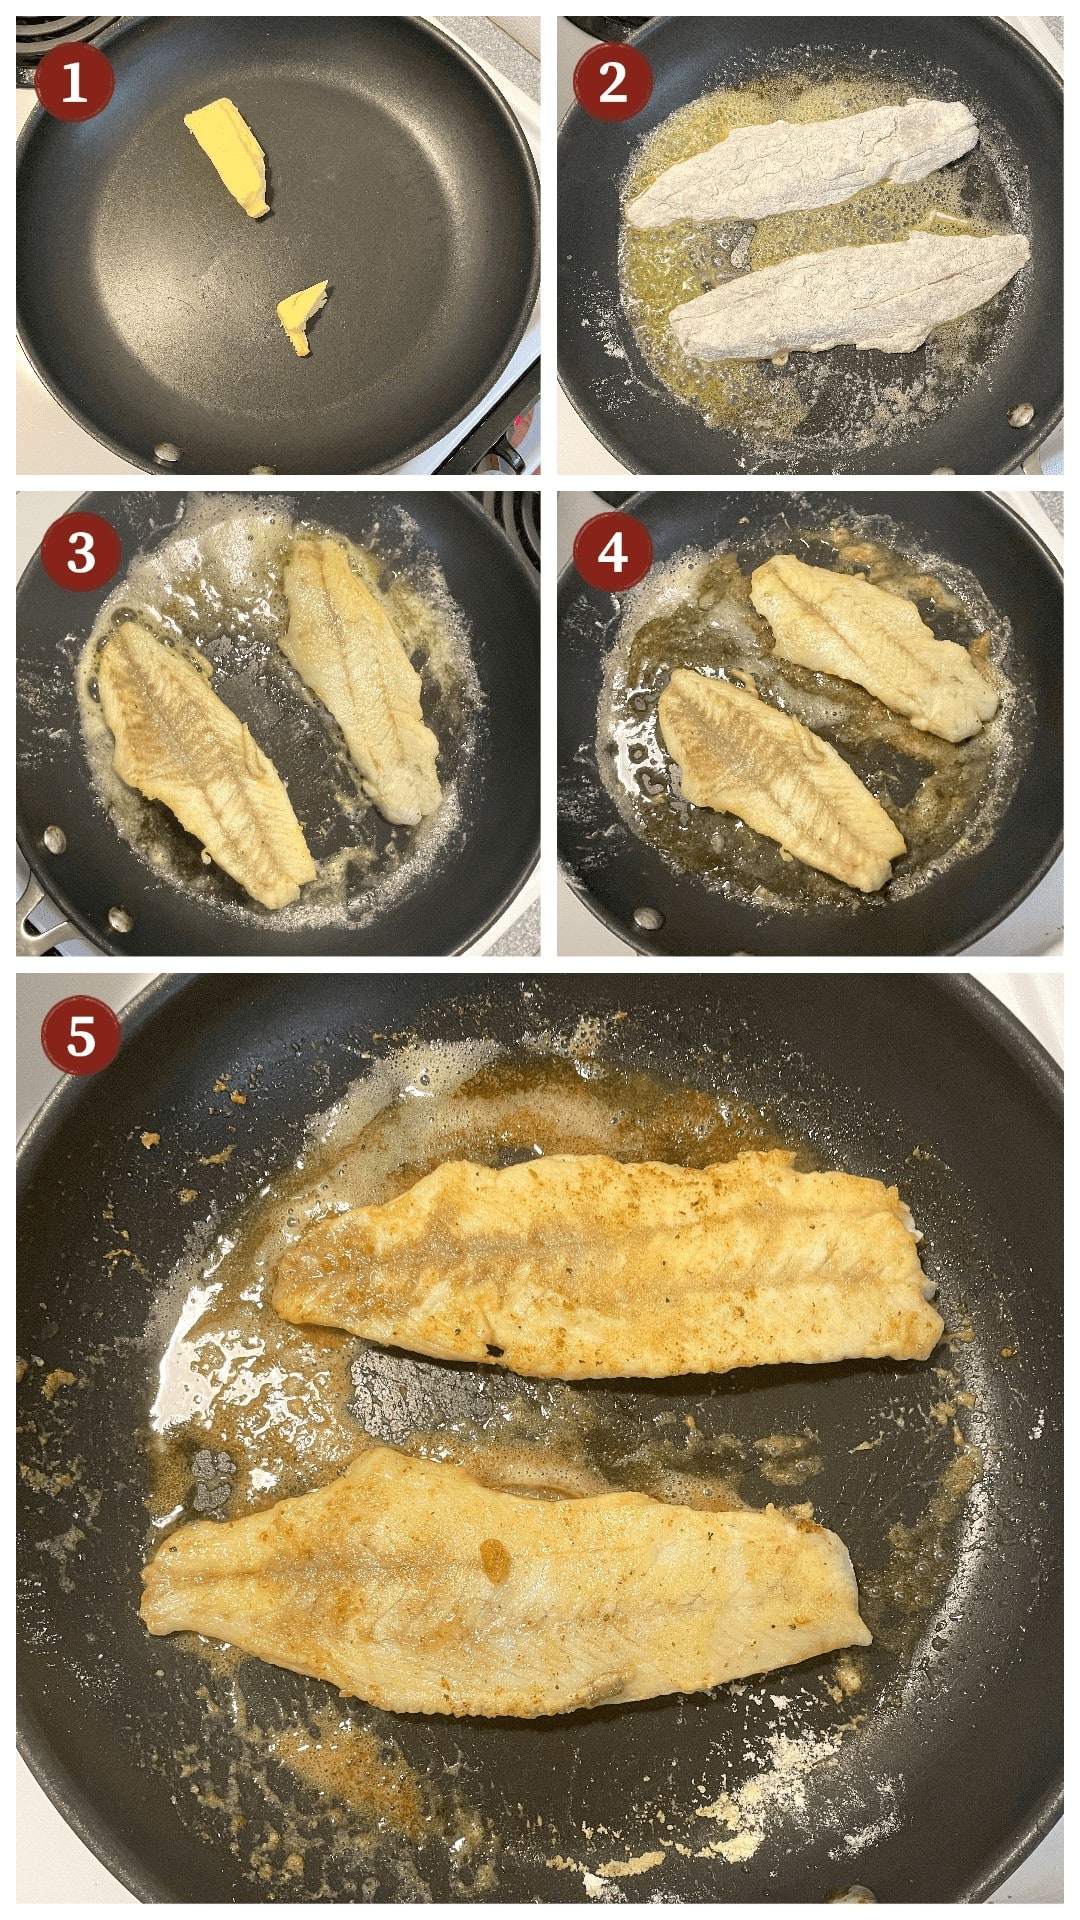 A collage of images showing how to pan fry trout fillets in butter, steps 1-5.